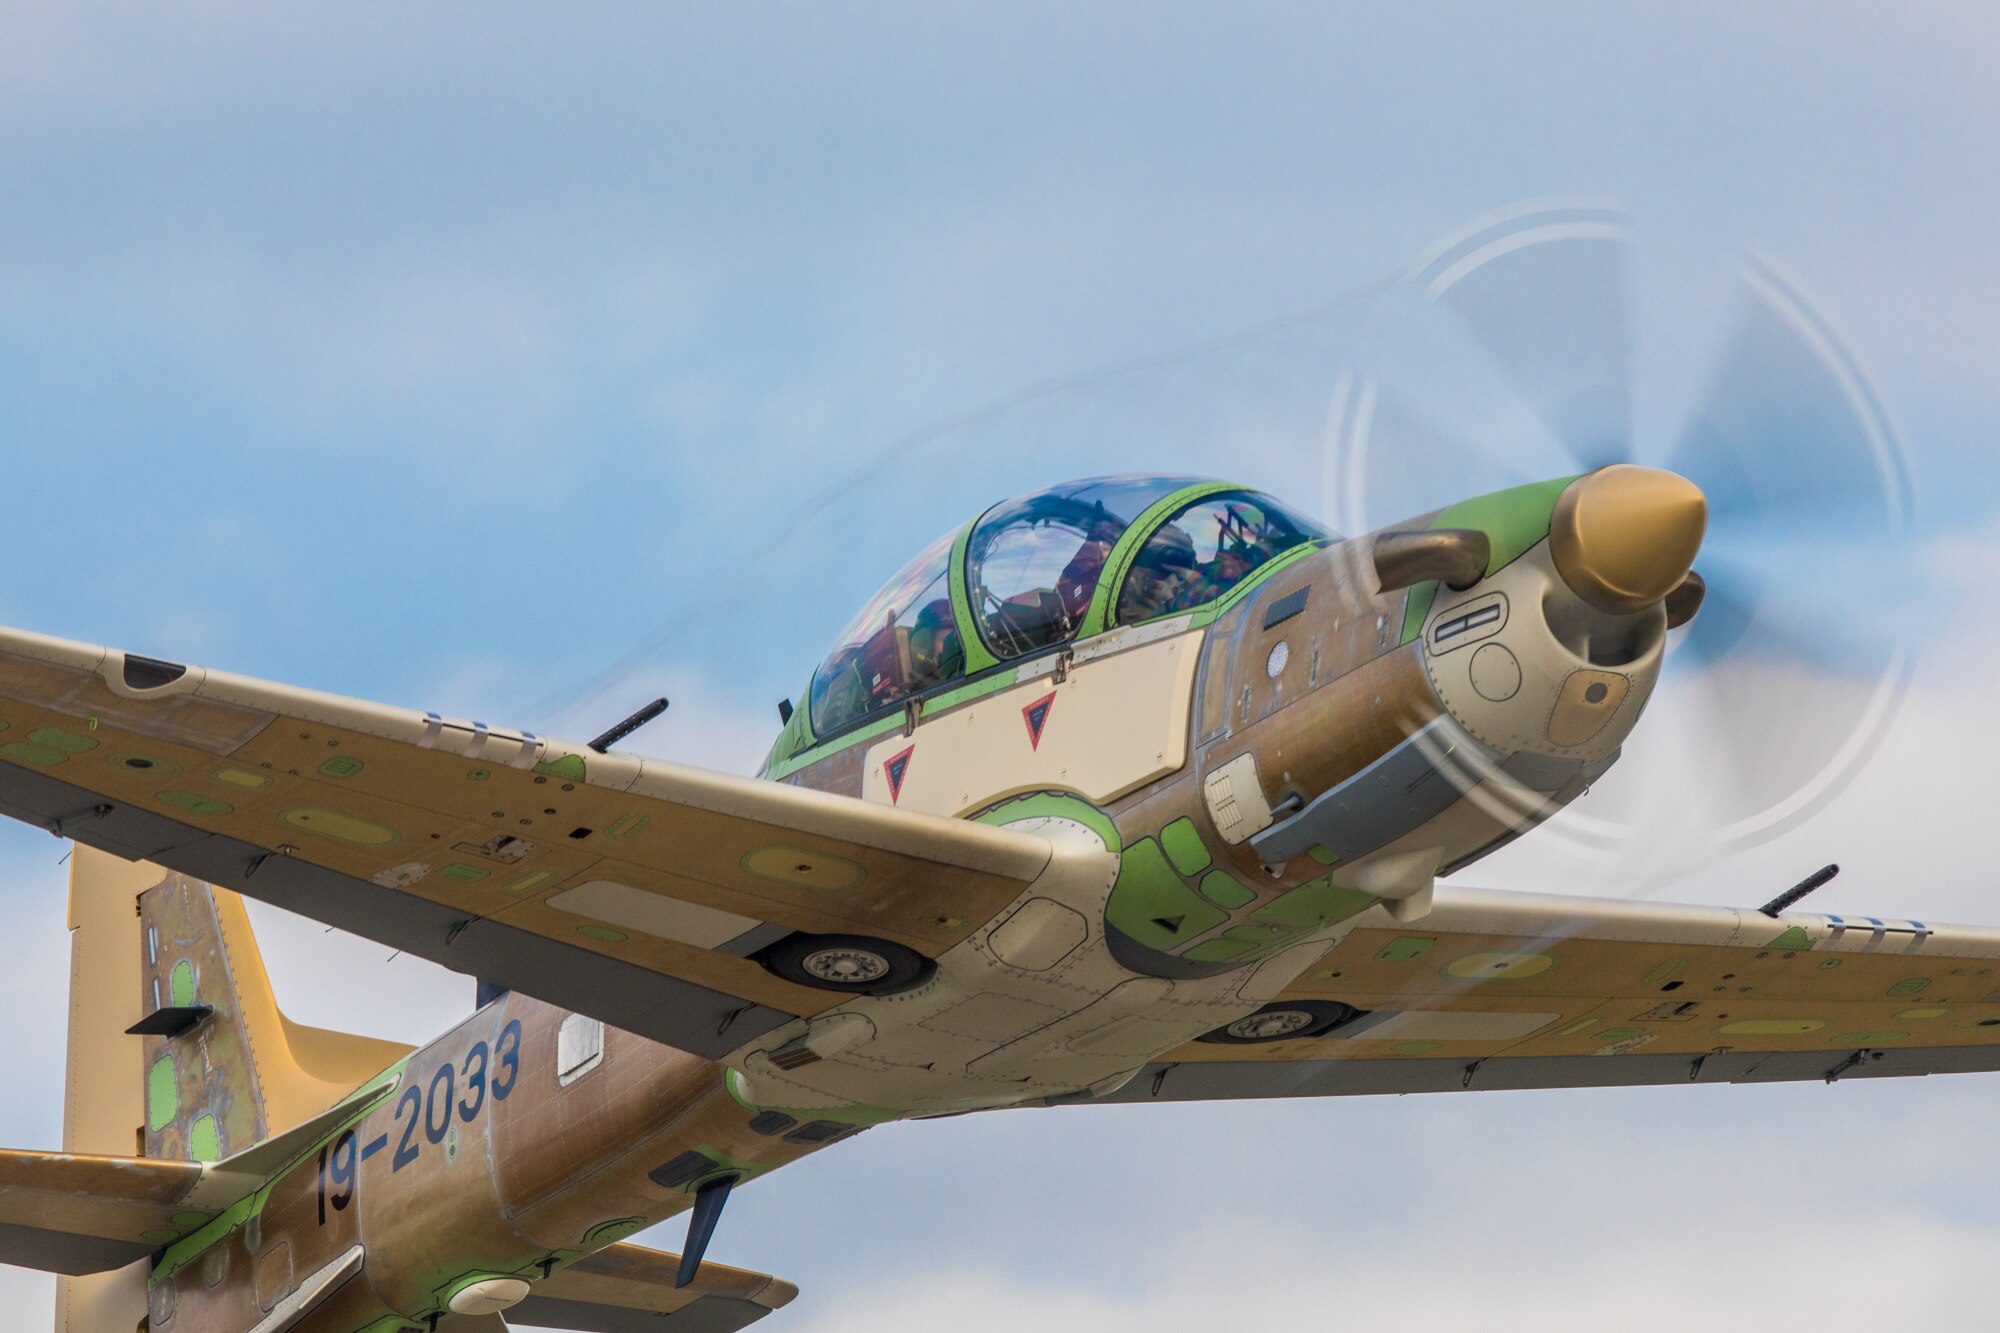 Sierra Nevada Corporation (SNC) and Embraer Defense & Security successfully conducted the inaugural flight of an A-29 Super Tucano light attack, combat and reconnaissance aircraft for the Nigerian Air Force (NAF) at the production facility in Jacksonville, Florida, April 16. (Courtesy photo)